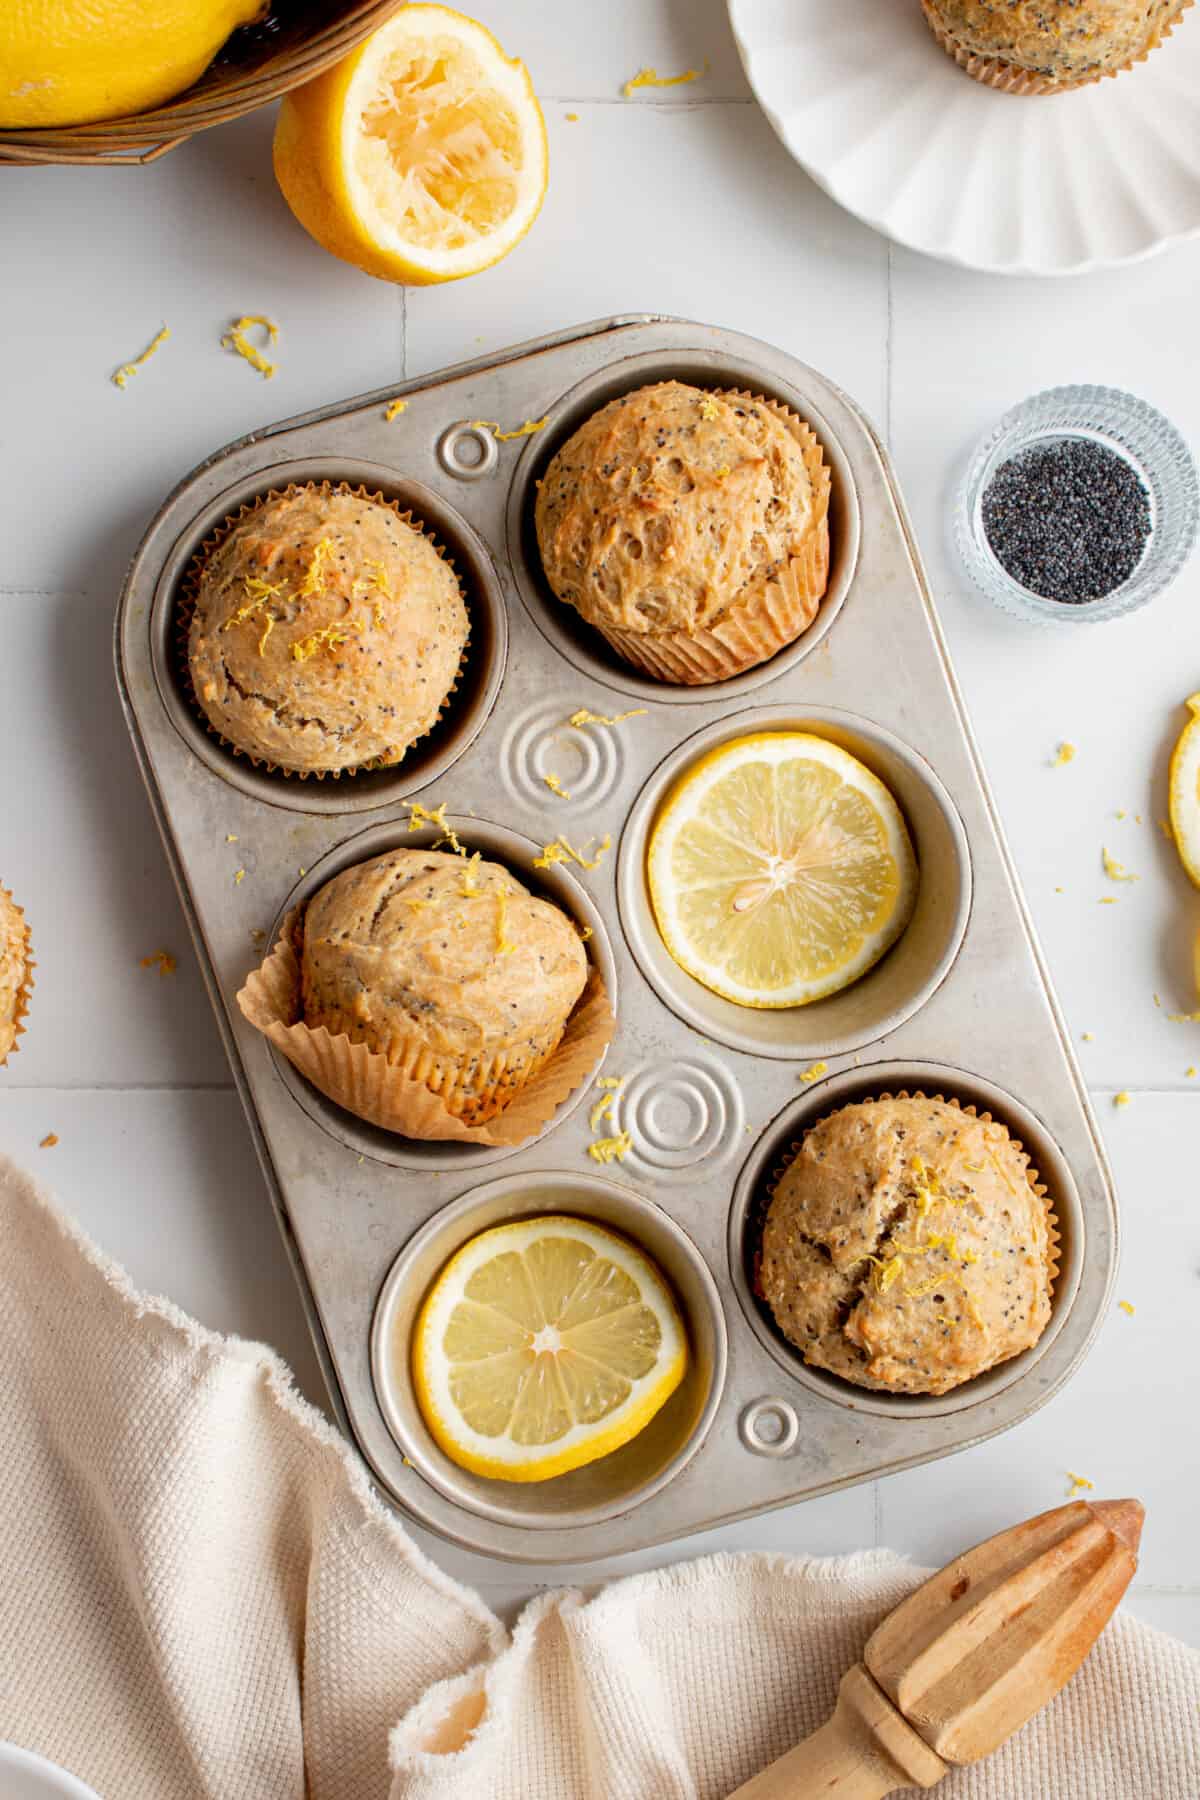 Lemon poppyseed muffins in a muffin tin with lemon slices.